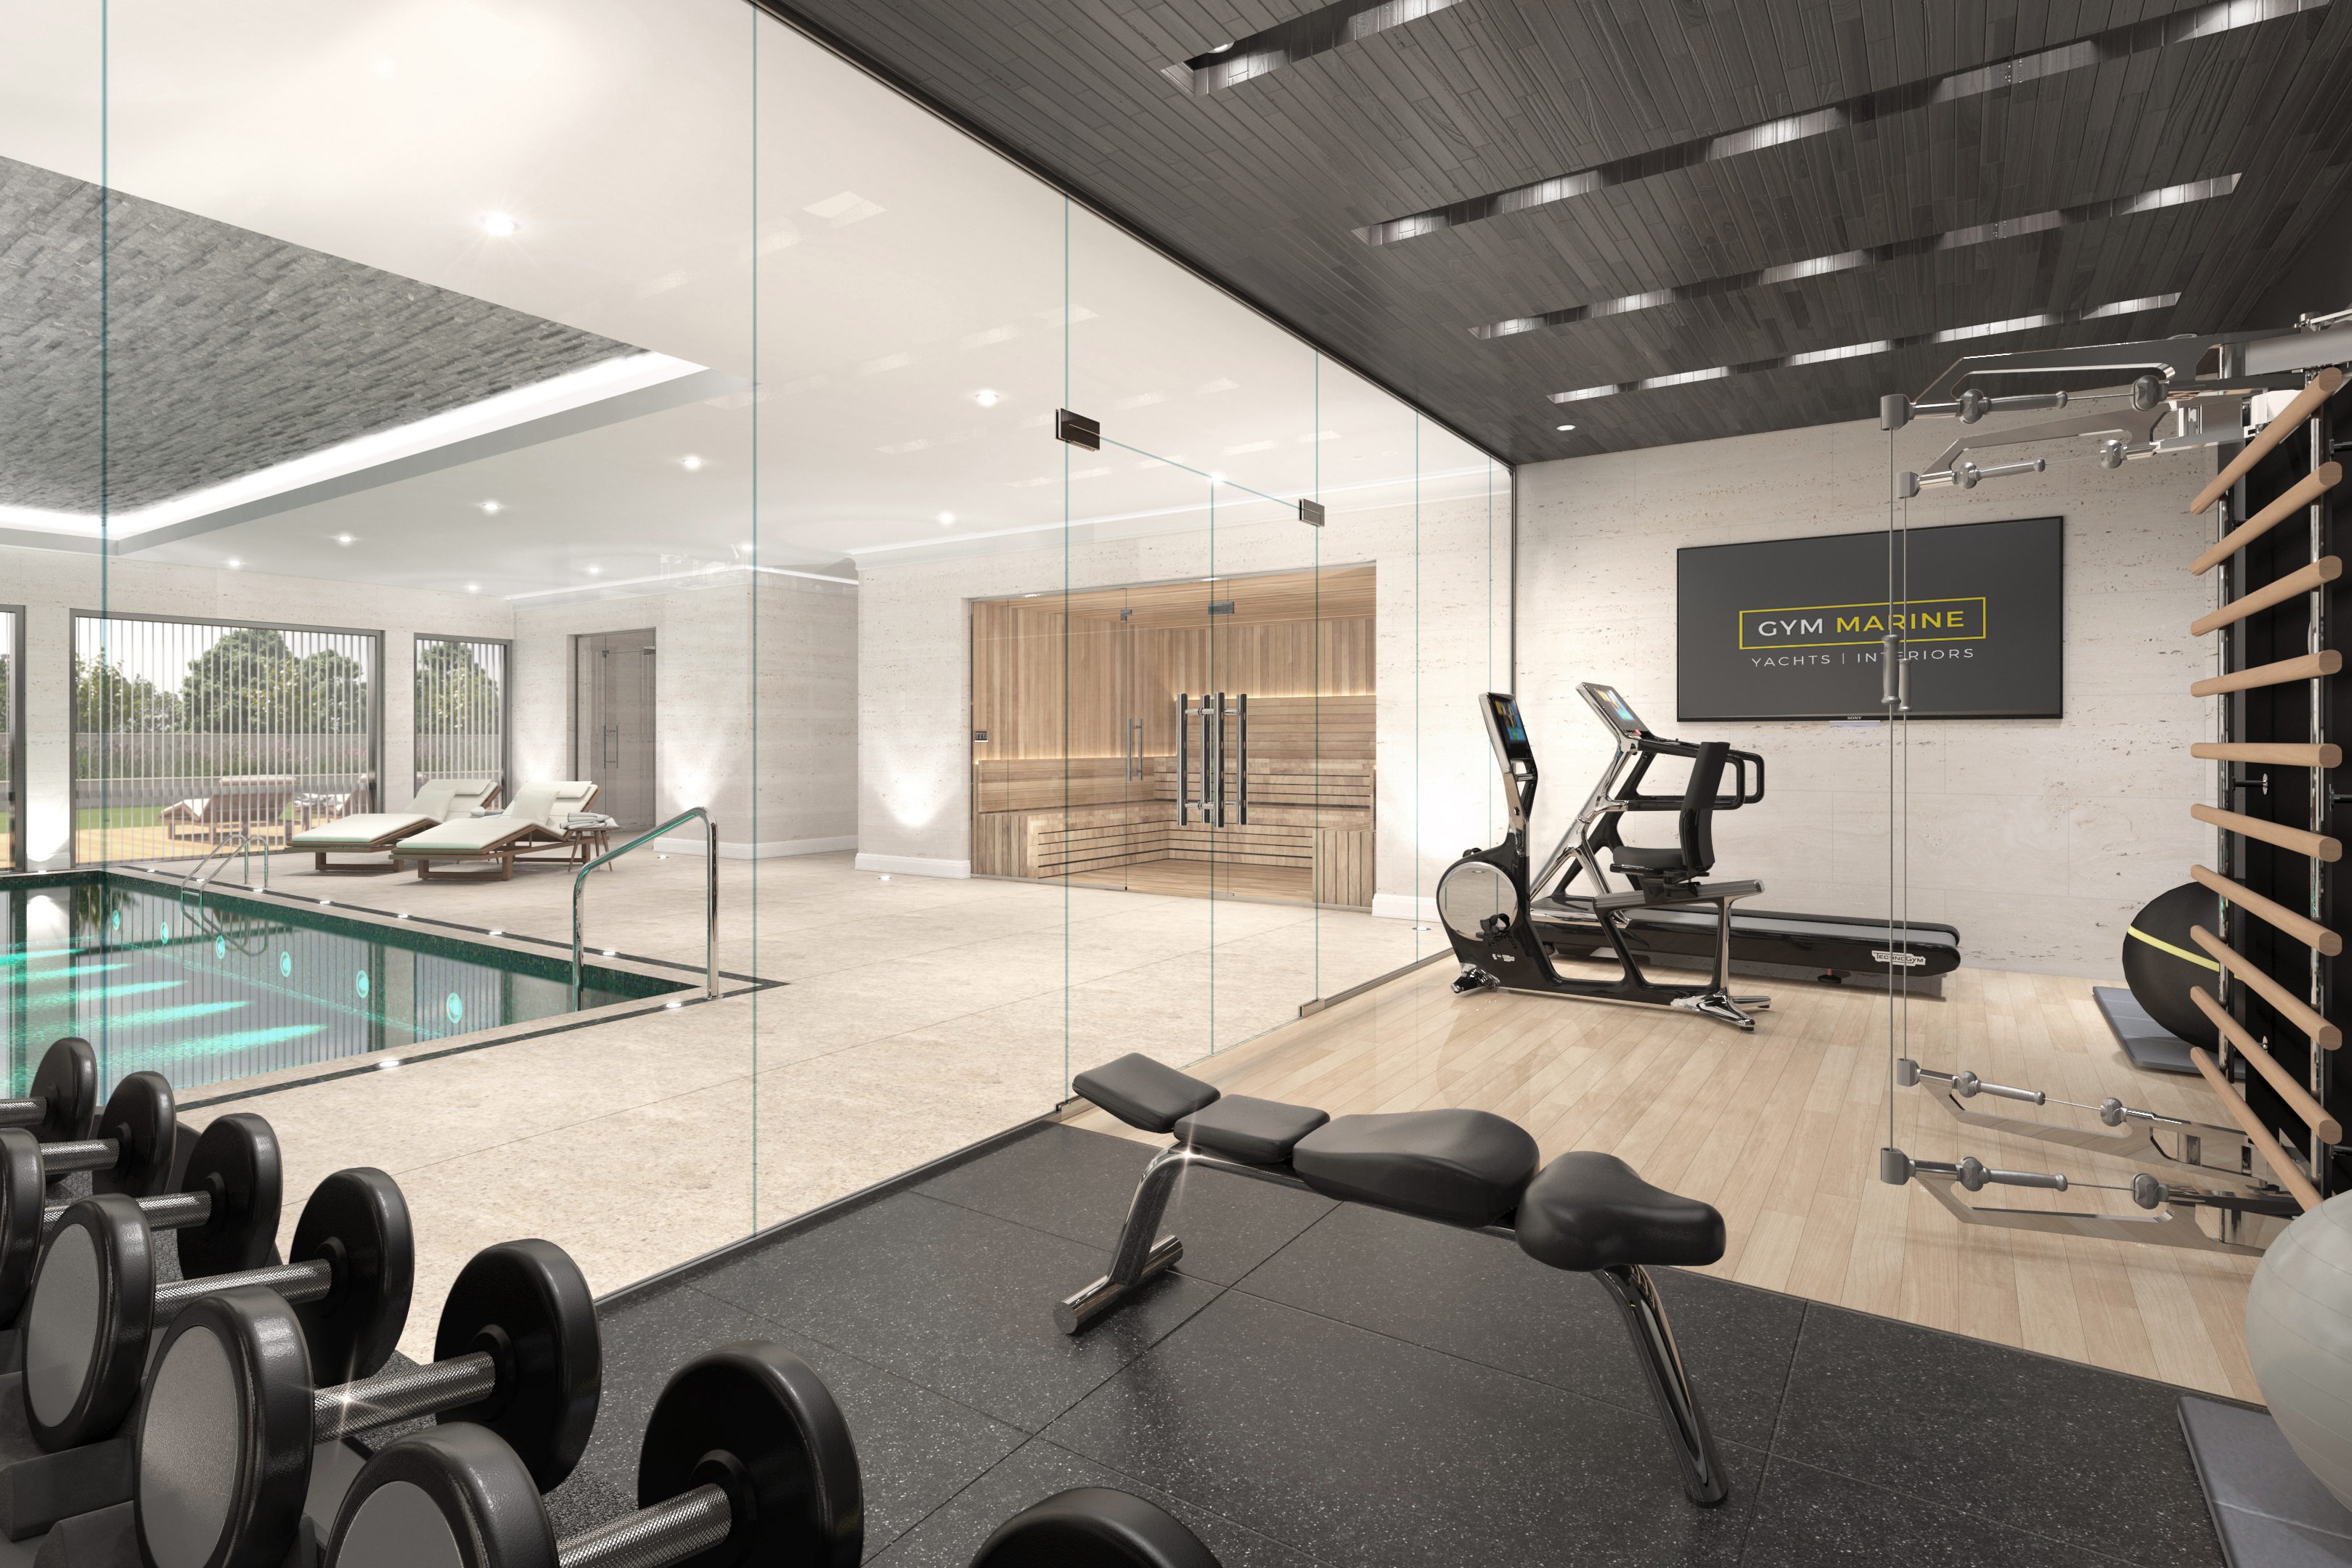 Gym Design › Commercial design consultants for gym owners.